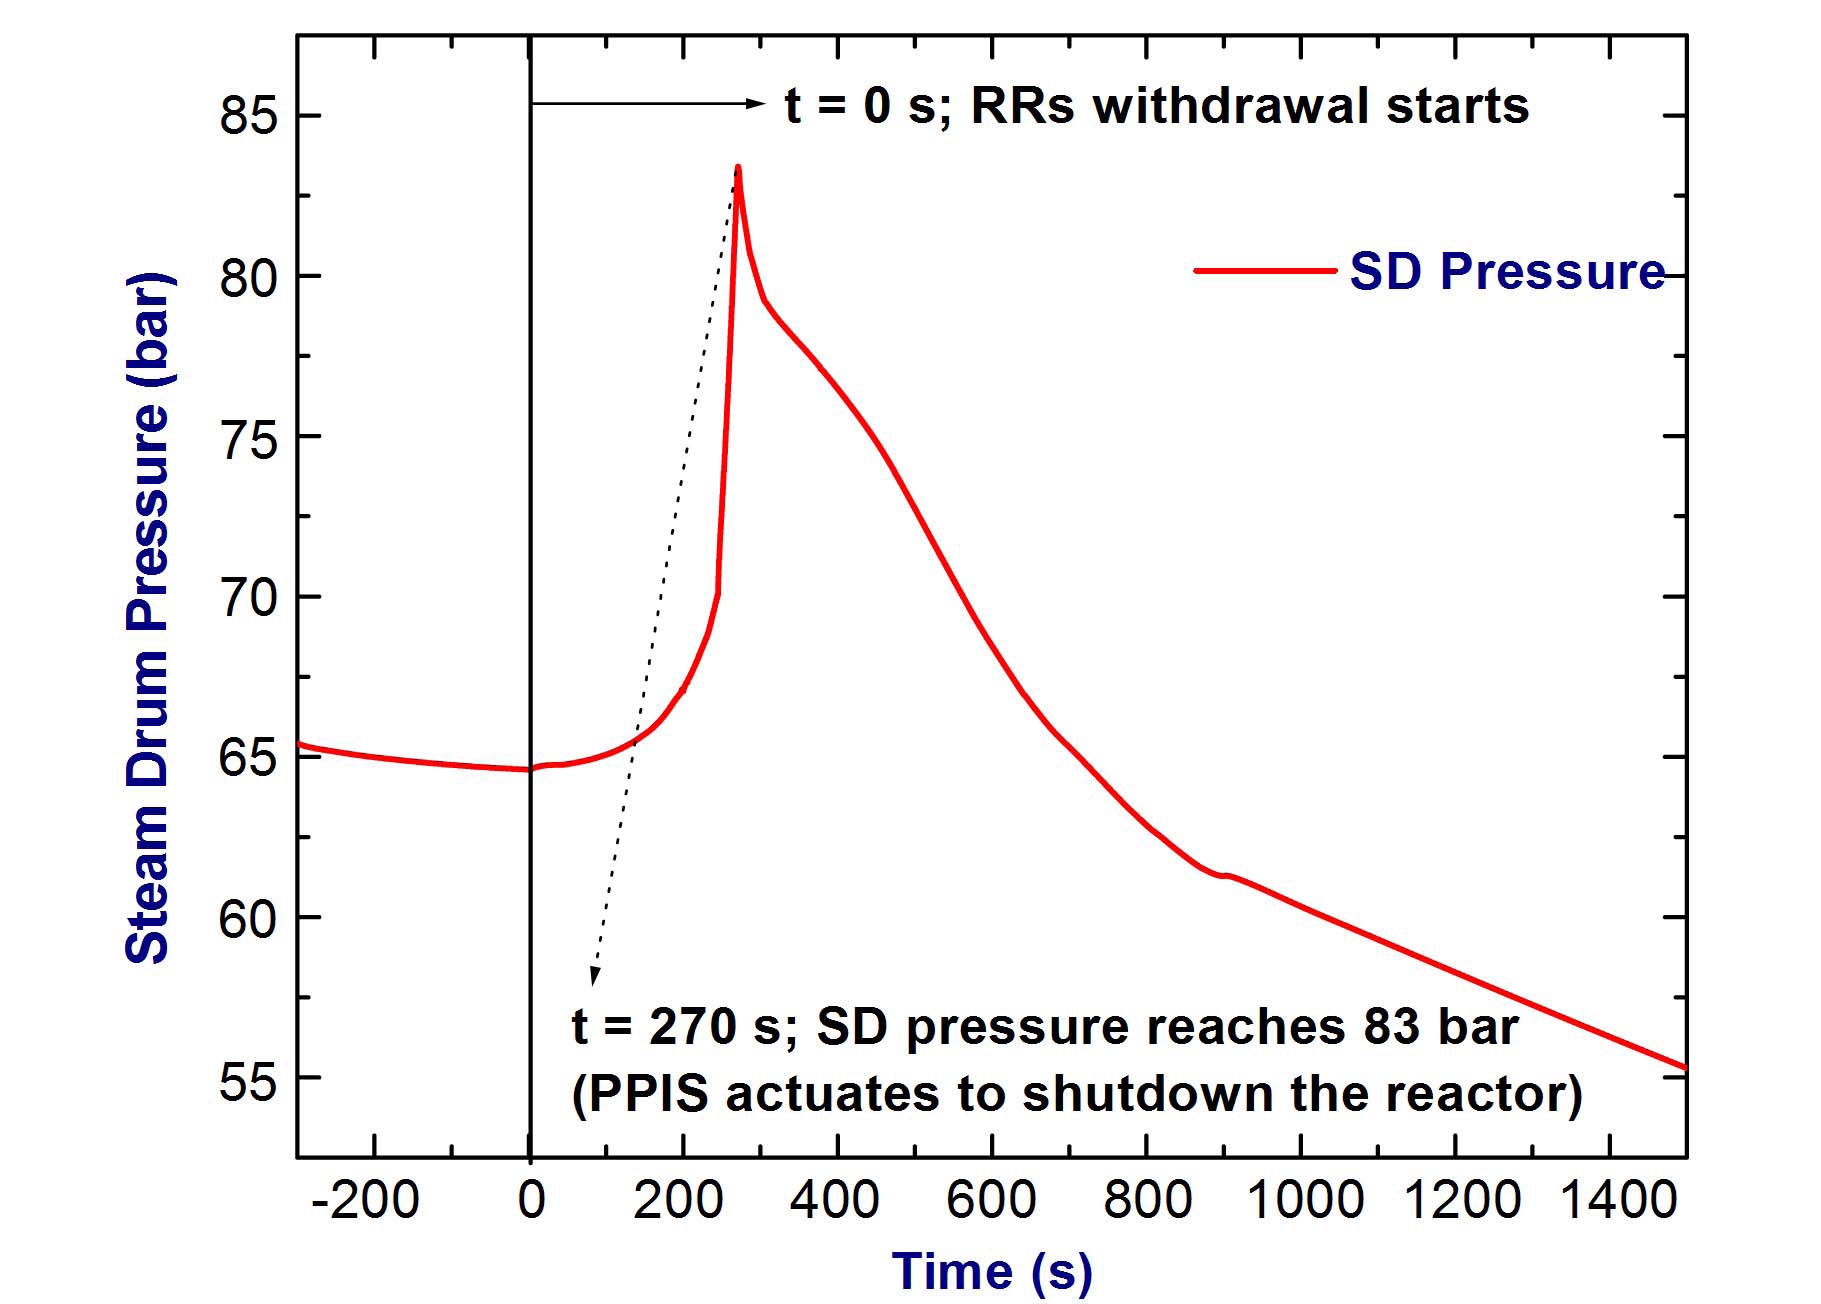 Steam Drum Pressure Following Rod Withdrawal Transient for Chernobyl-like Accident